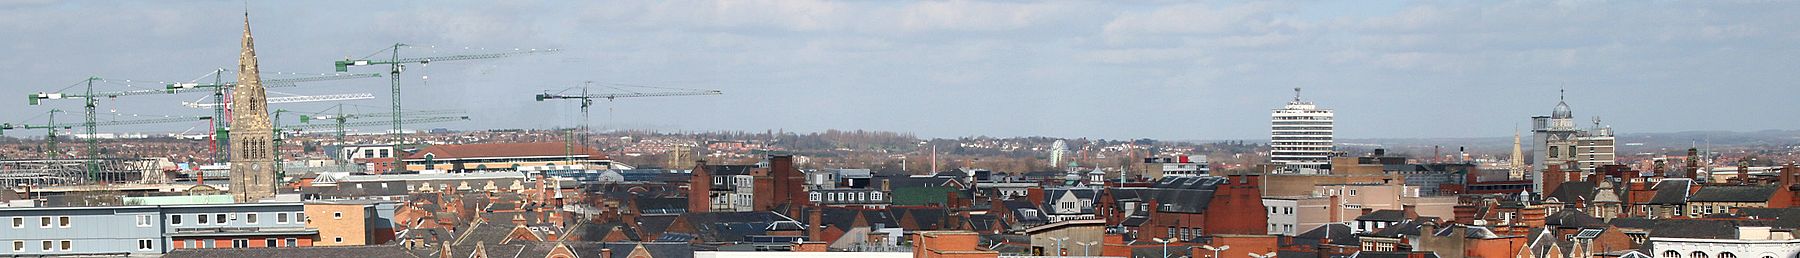 Leicester Wikivoyage banner.jpg